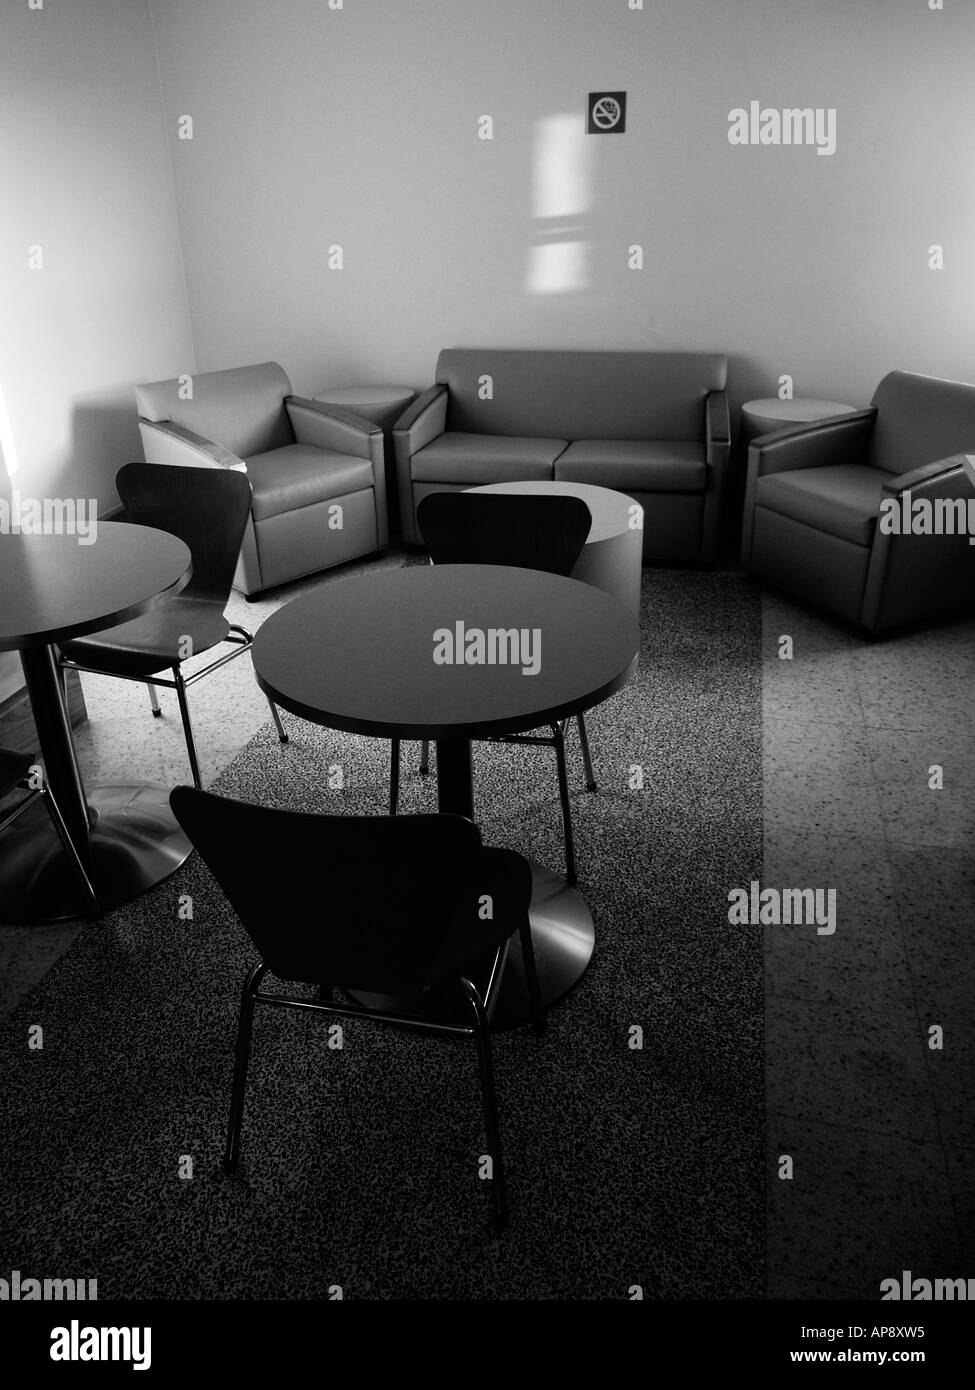 Black and white shot of the interior of a lounge or waiting room with stuffed chairs and tables, naturally lit. Stock Photo